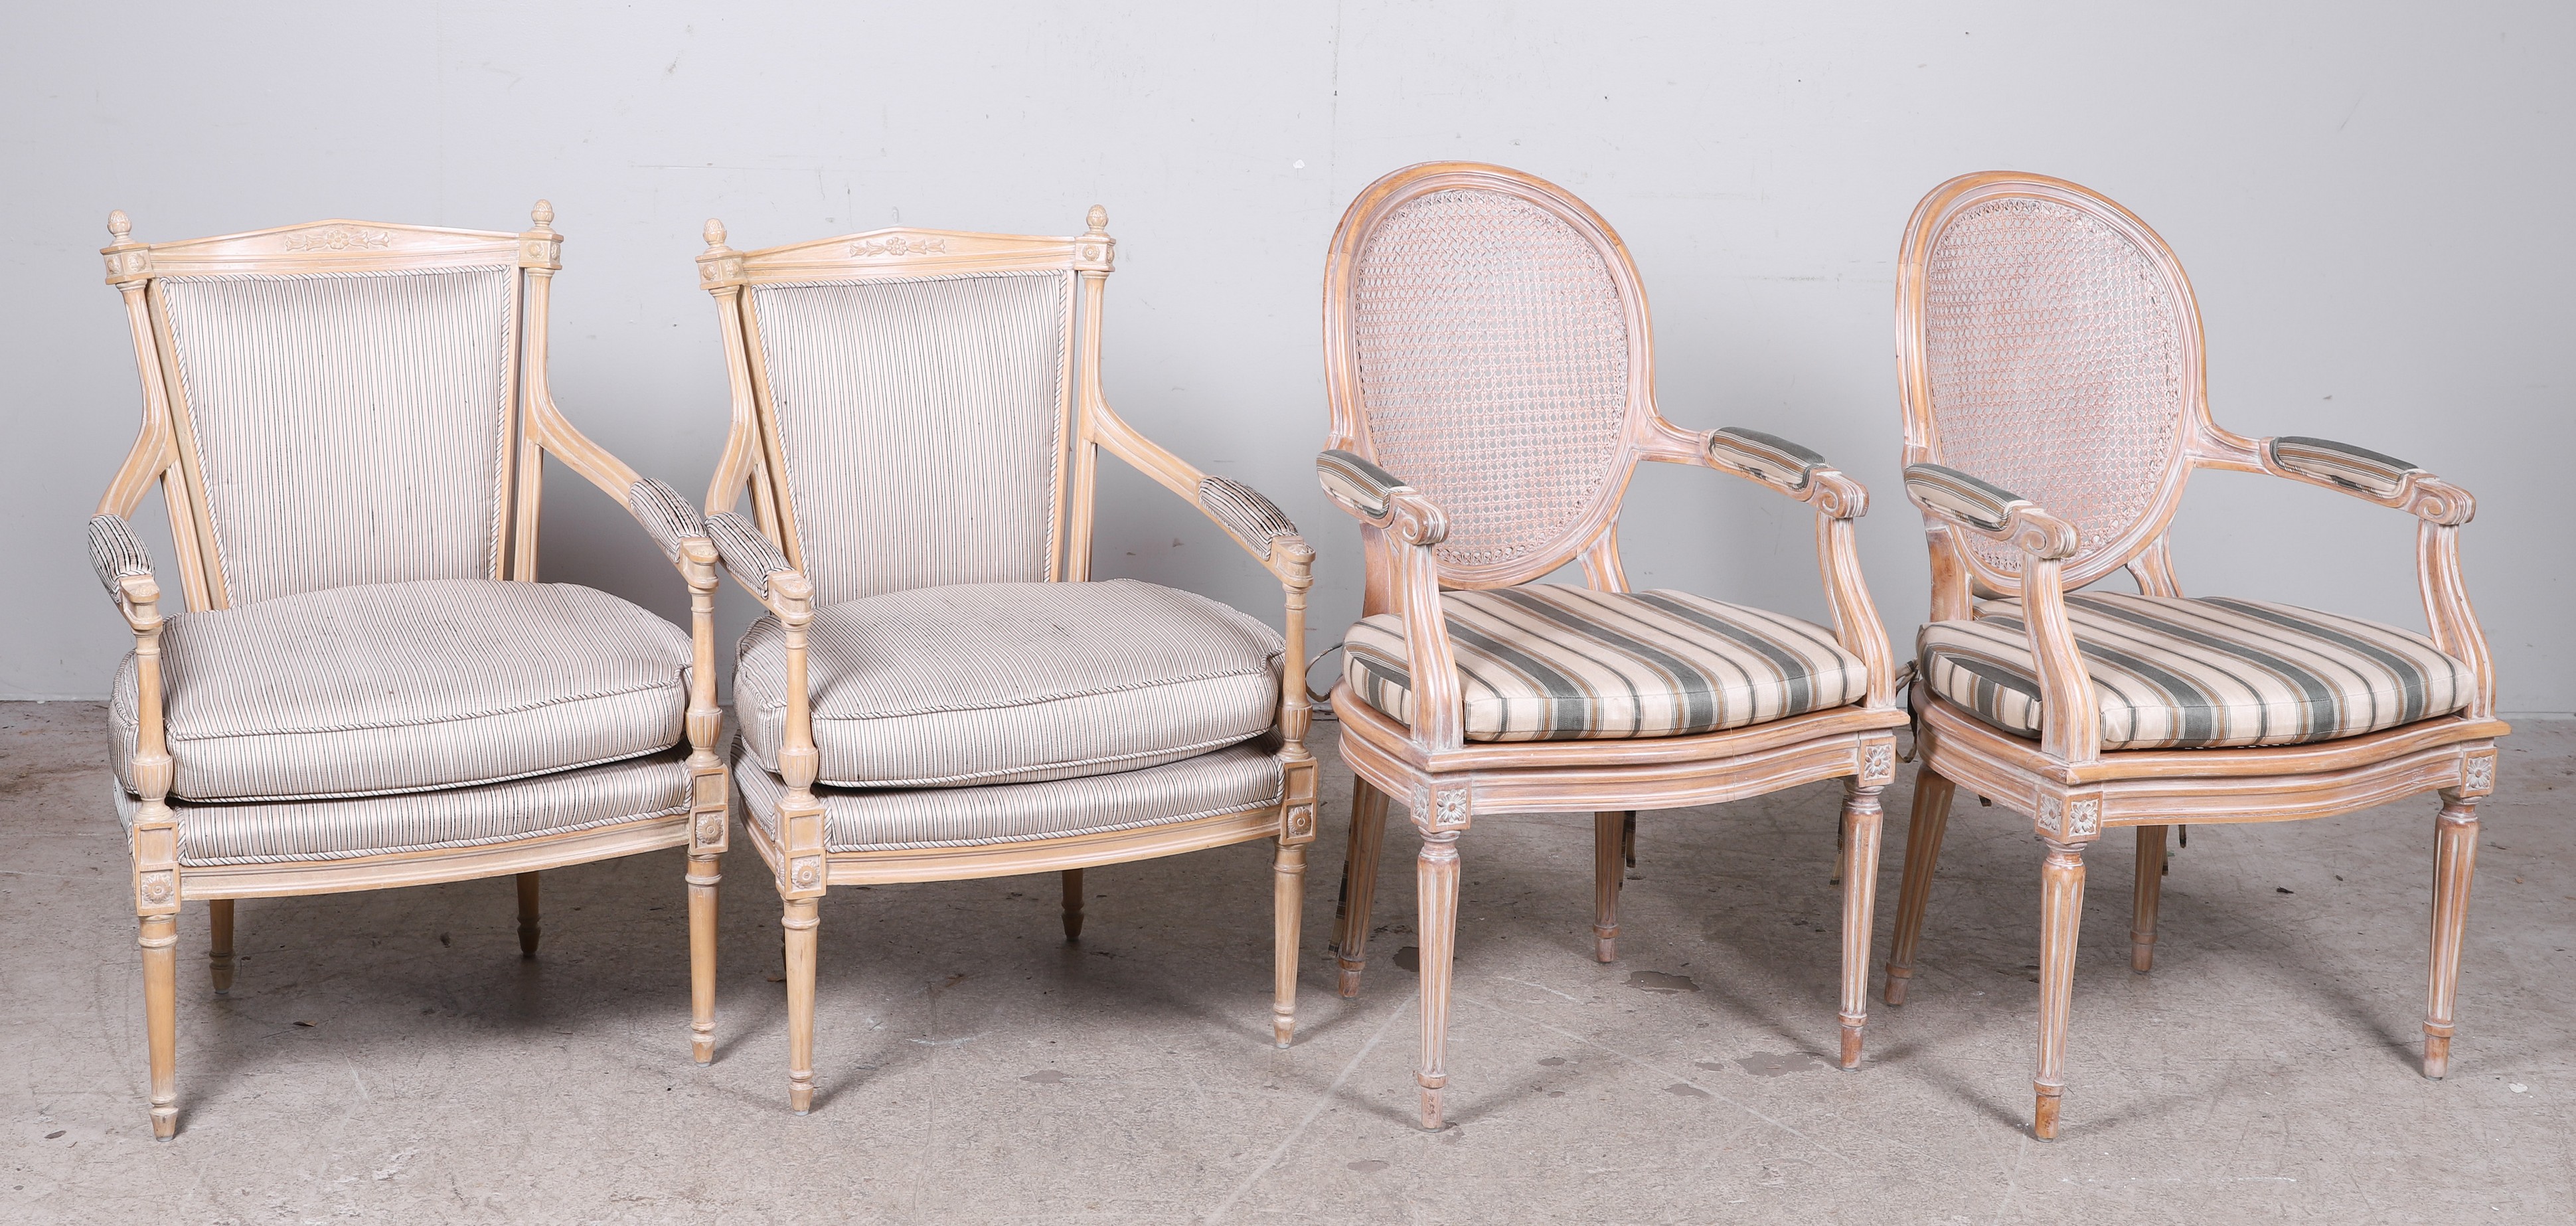 (2) Pairs of Louis XVI Style Fauteuils,